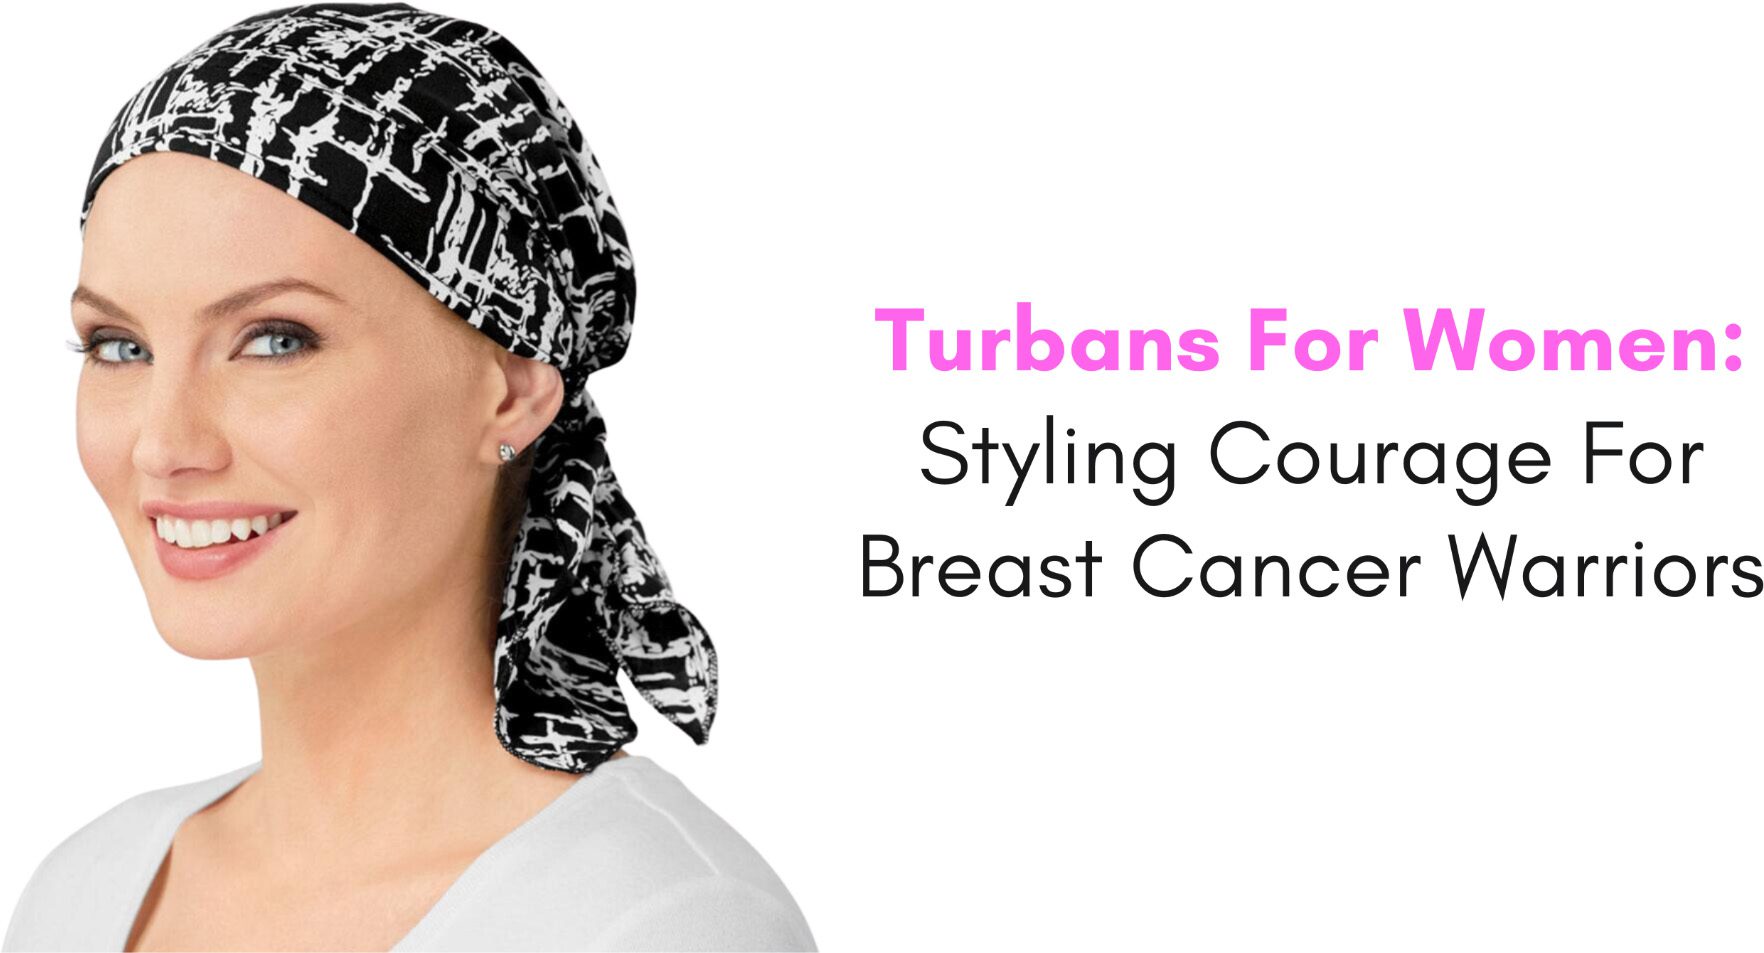 Turbans For Women: Styling Courage For Breast Cancer Warriors